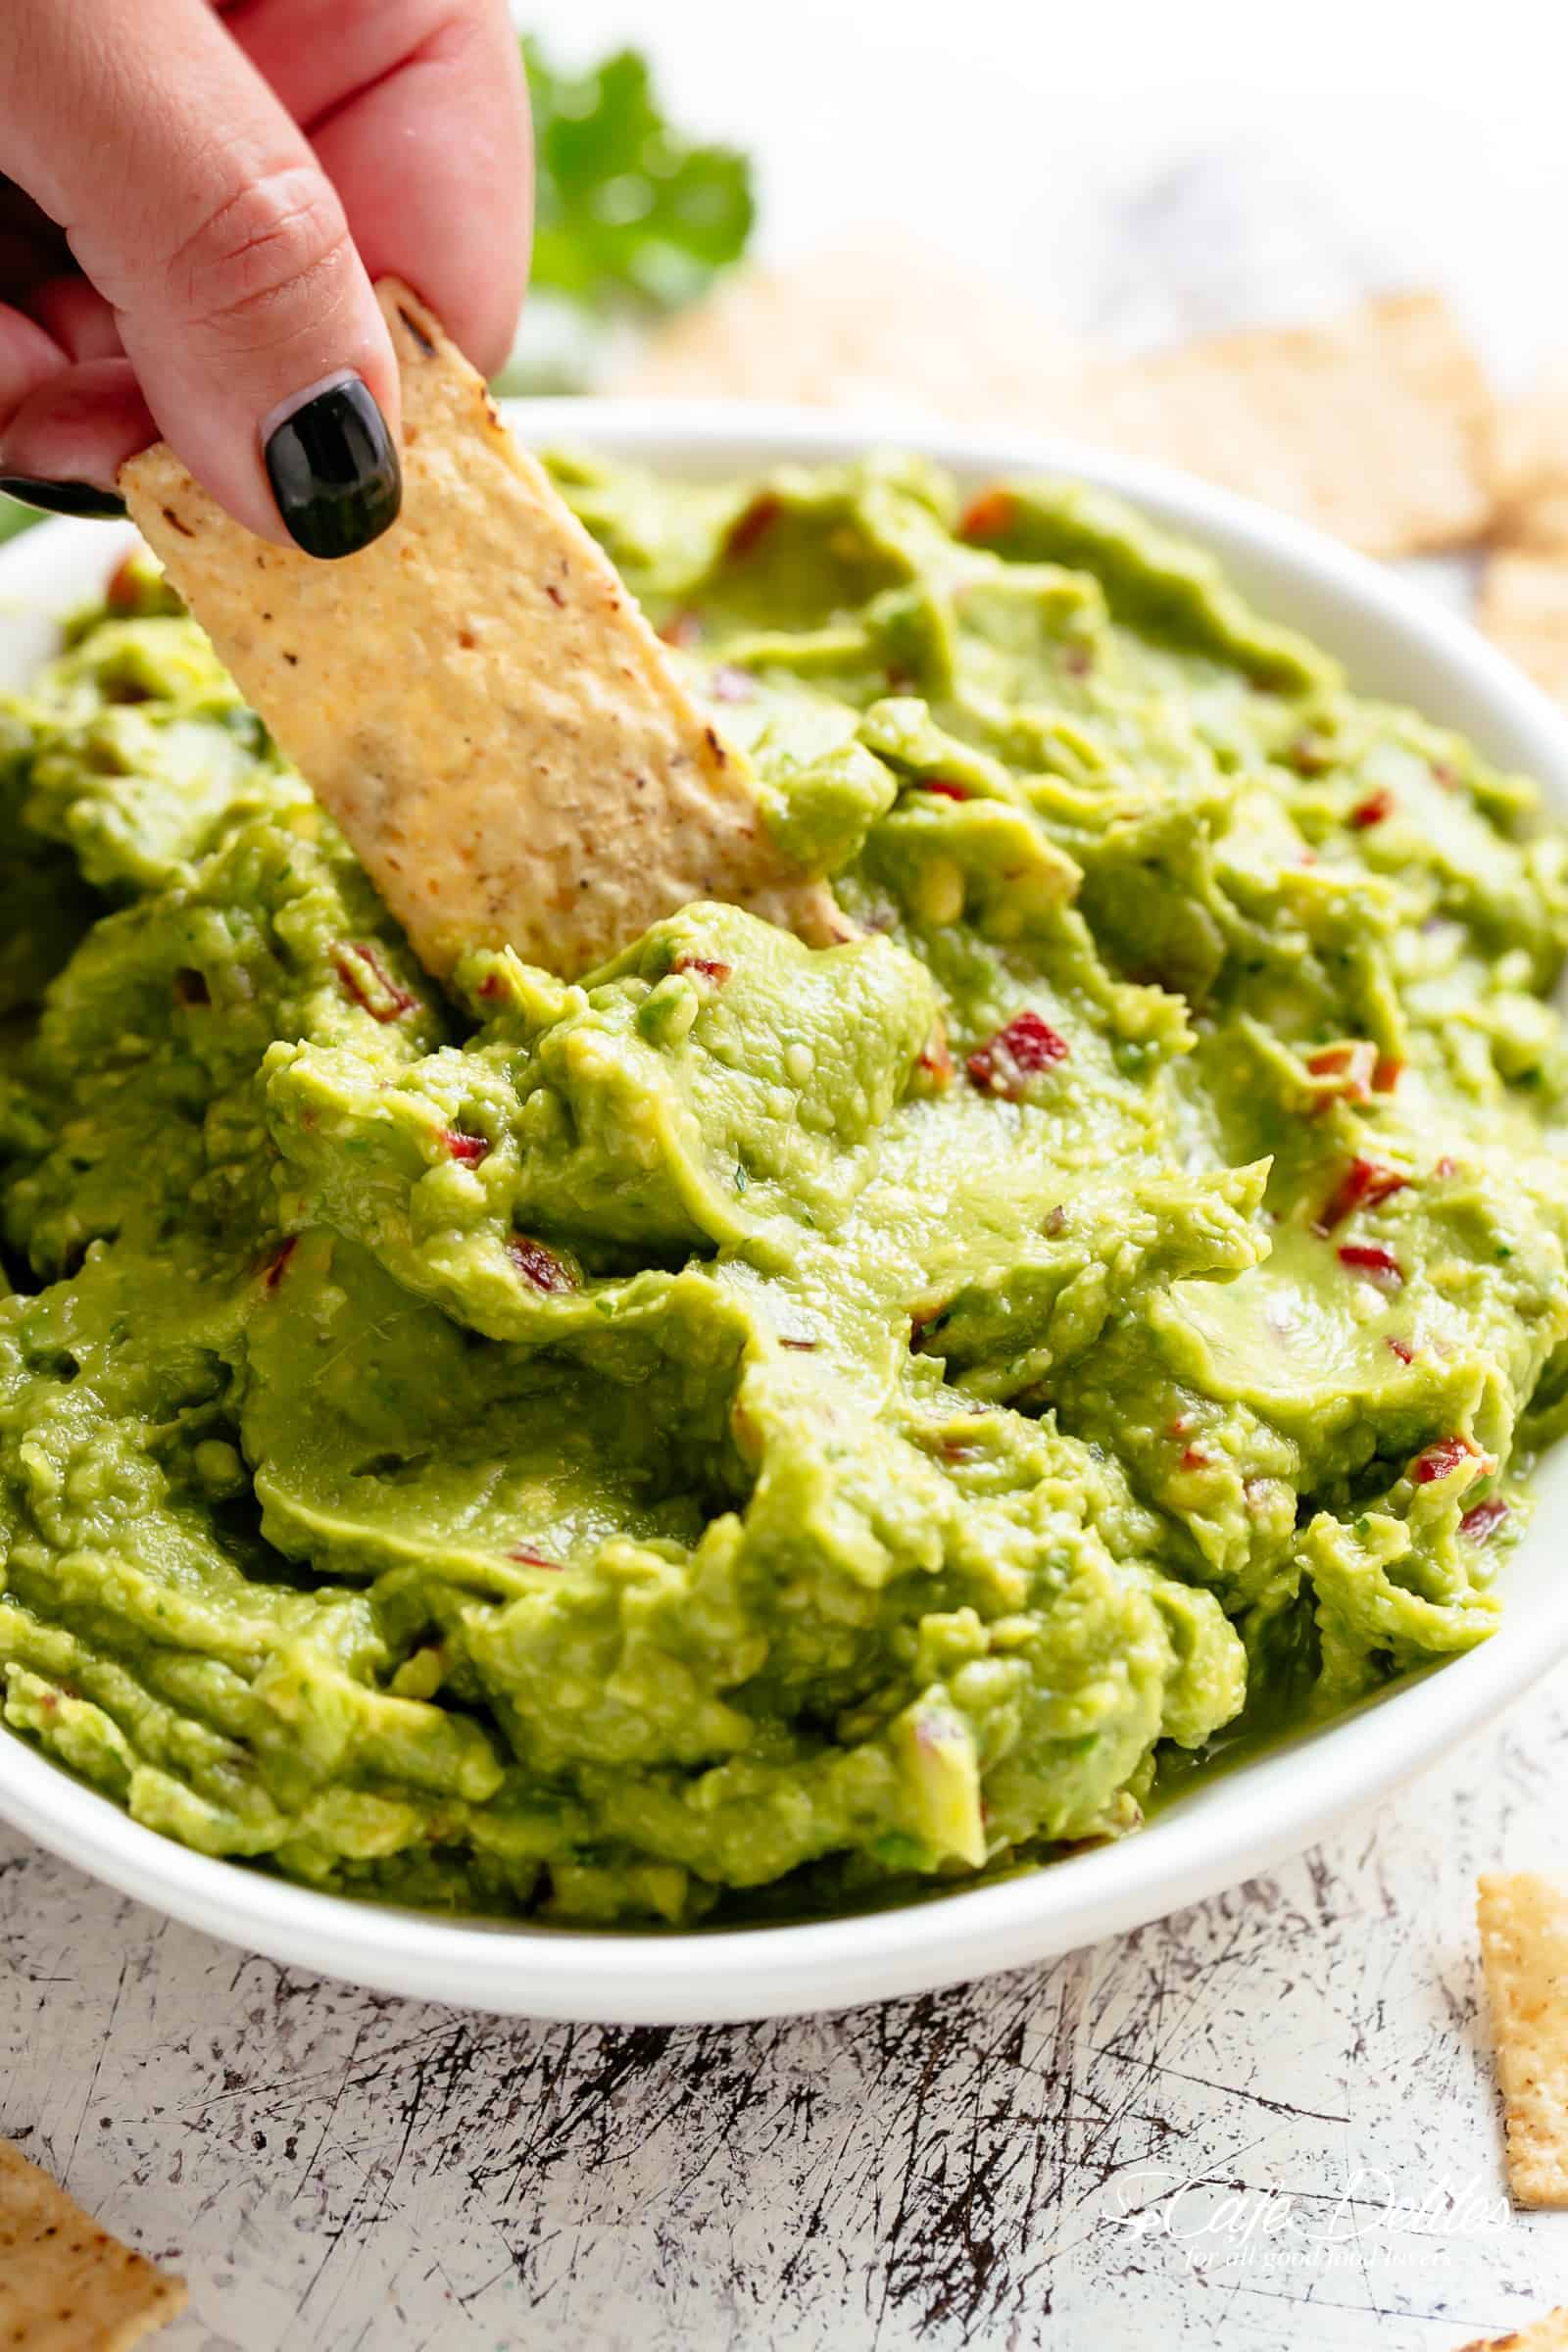 The best, creamy Guacamole is so easy to make and better than anything found in a jar! Homemade Guacamole takes minutes to make and is so incredibly delicious! Perfect for a party as an appetizer OR just a simple snack! Use as a topping for your favourite fajitas, tacos and even carnitas! | cafedelites.com